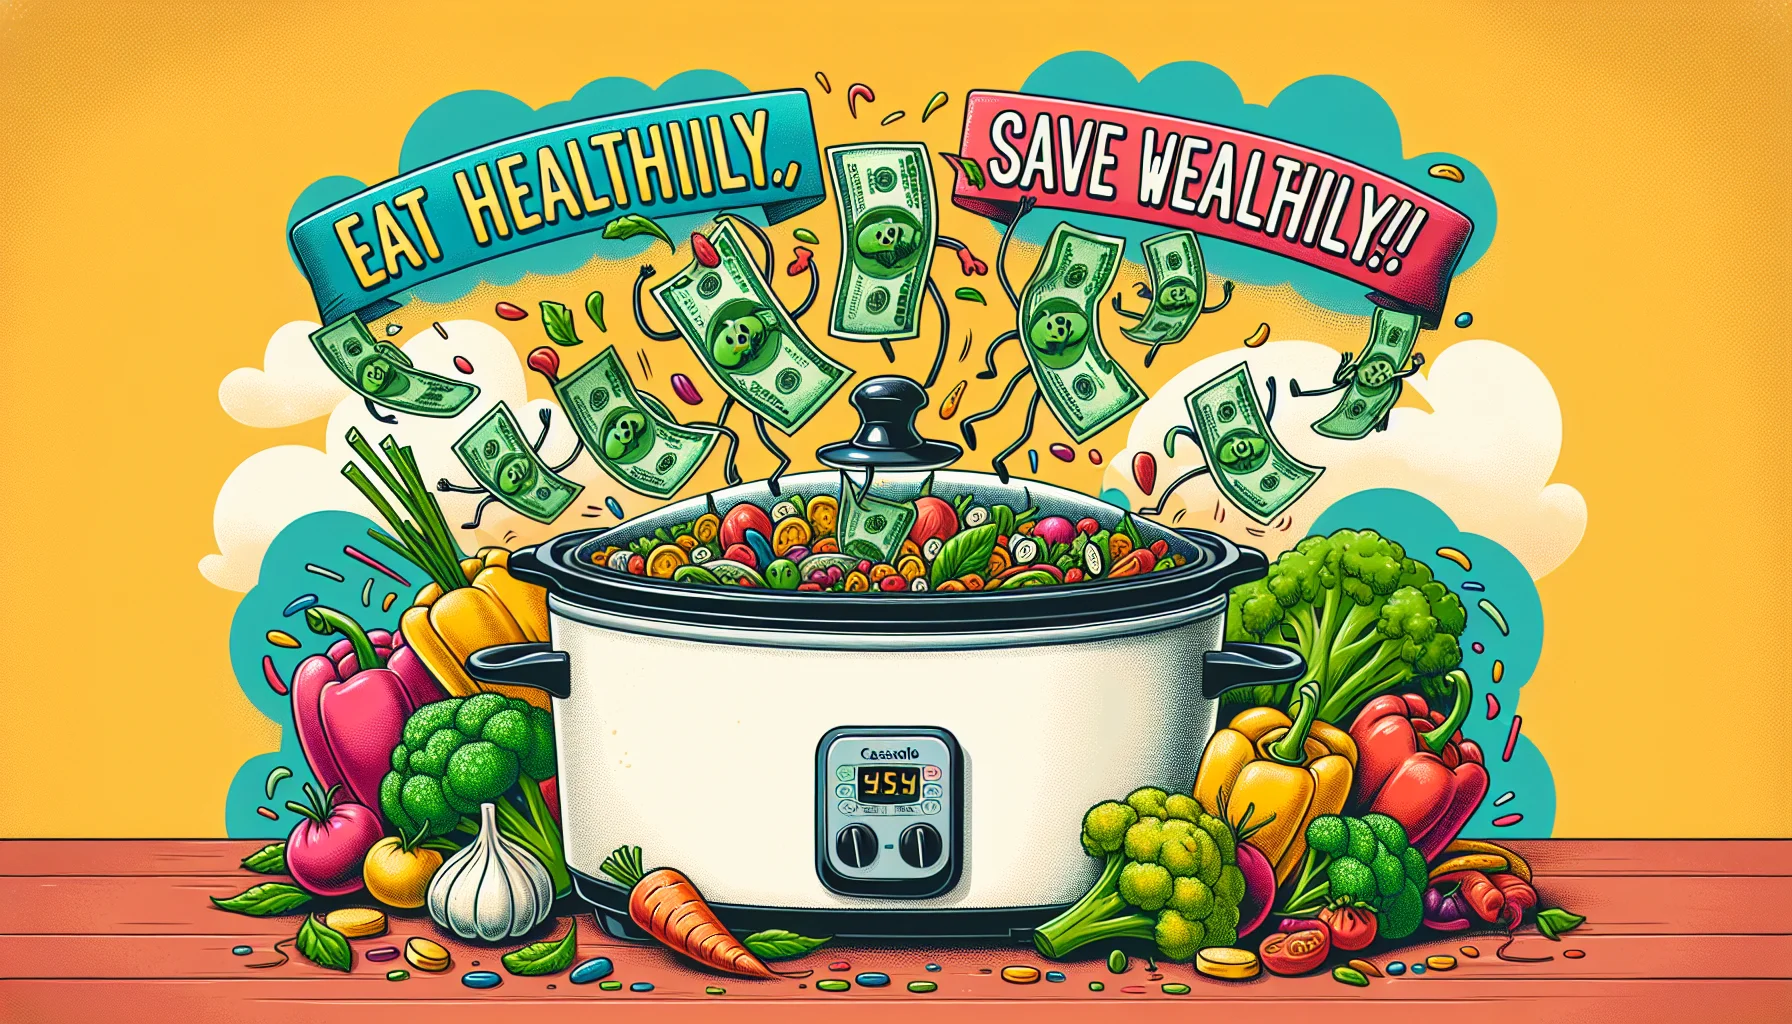 Get imaginative with a lively and humorous scene illustrating a casserole slow cooker. The slow cooker is blissfully decorated with dollar bills instead of usual ingredients, symbolizing cost savings. There are vibrant vegetables like carrots, broccoli, bell peppers, dancing around it, emphasizing the concept of eating healthy. To make the scenario more appealing, include a playful banner hovering above the scene that reads 'Eat Healthily, Save Wealthily!' all in a lively, pop-art style.